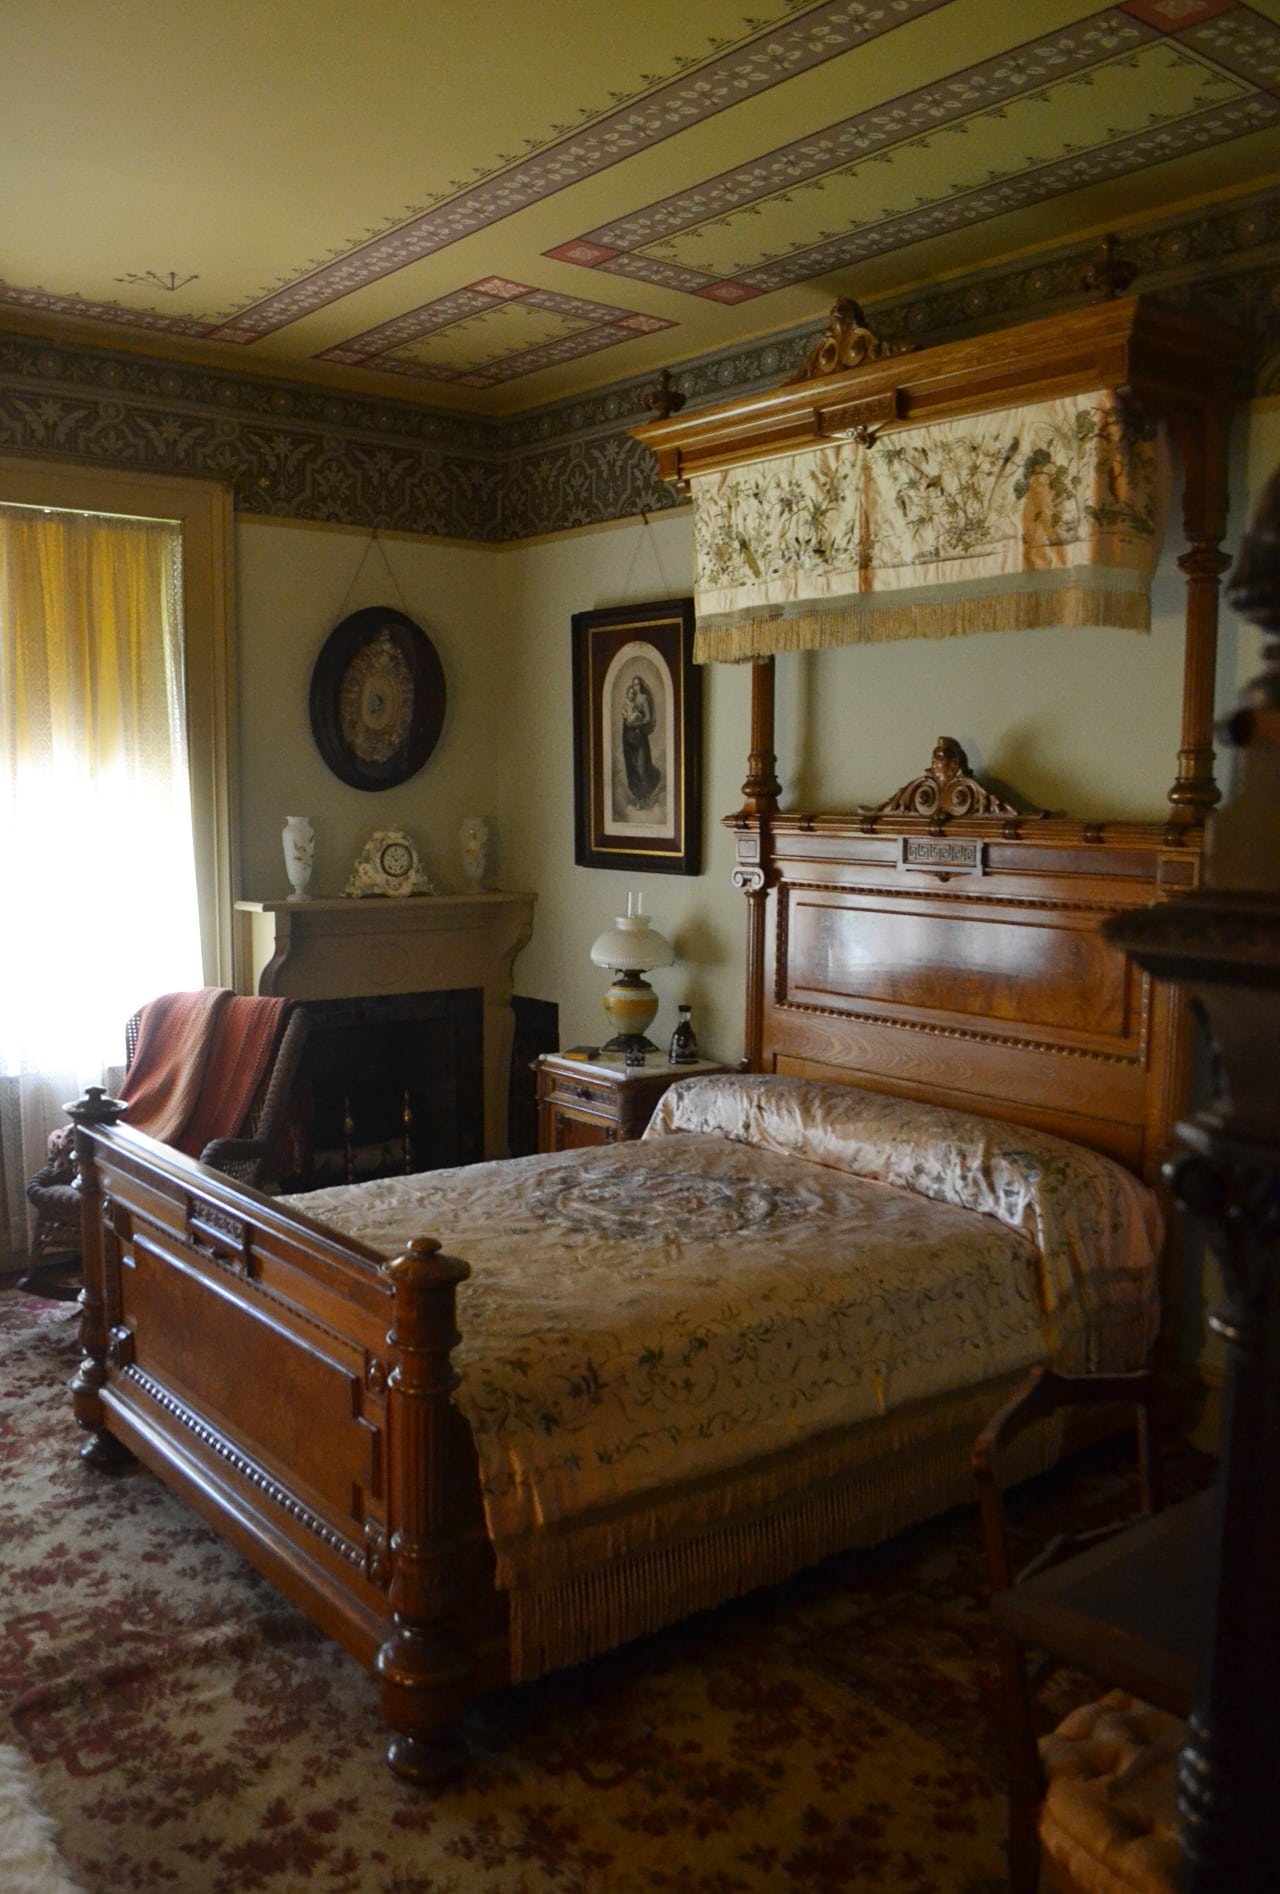 Also on the second floor was the room Clemens referred to as "Ma's bedroom," in honor of its most frequent occupant, Livy's widowed mother.